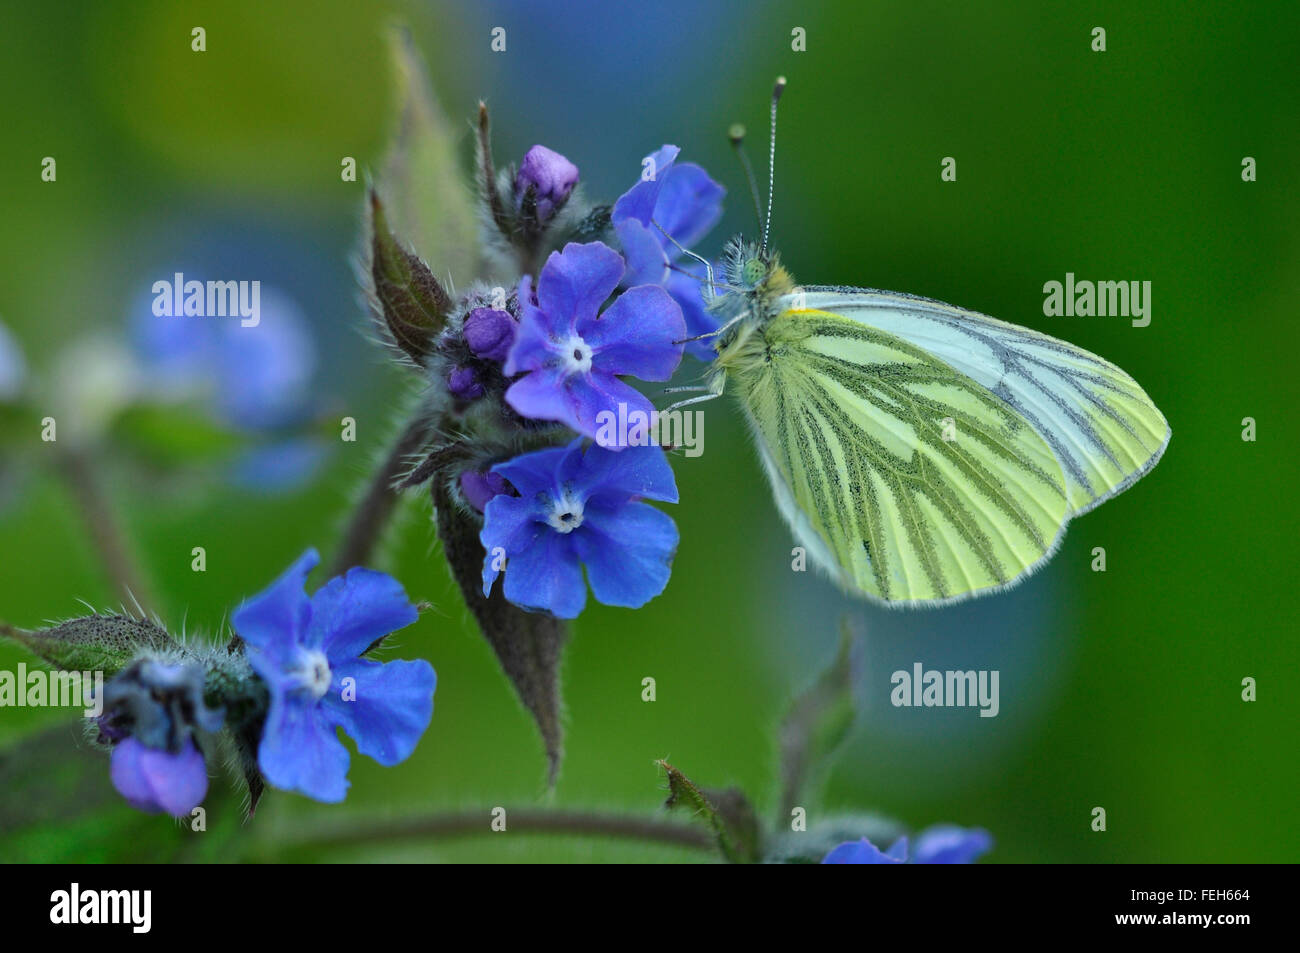 green-veined white butterfly Stock Photo